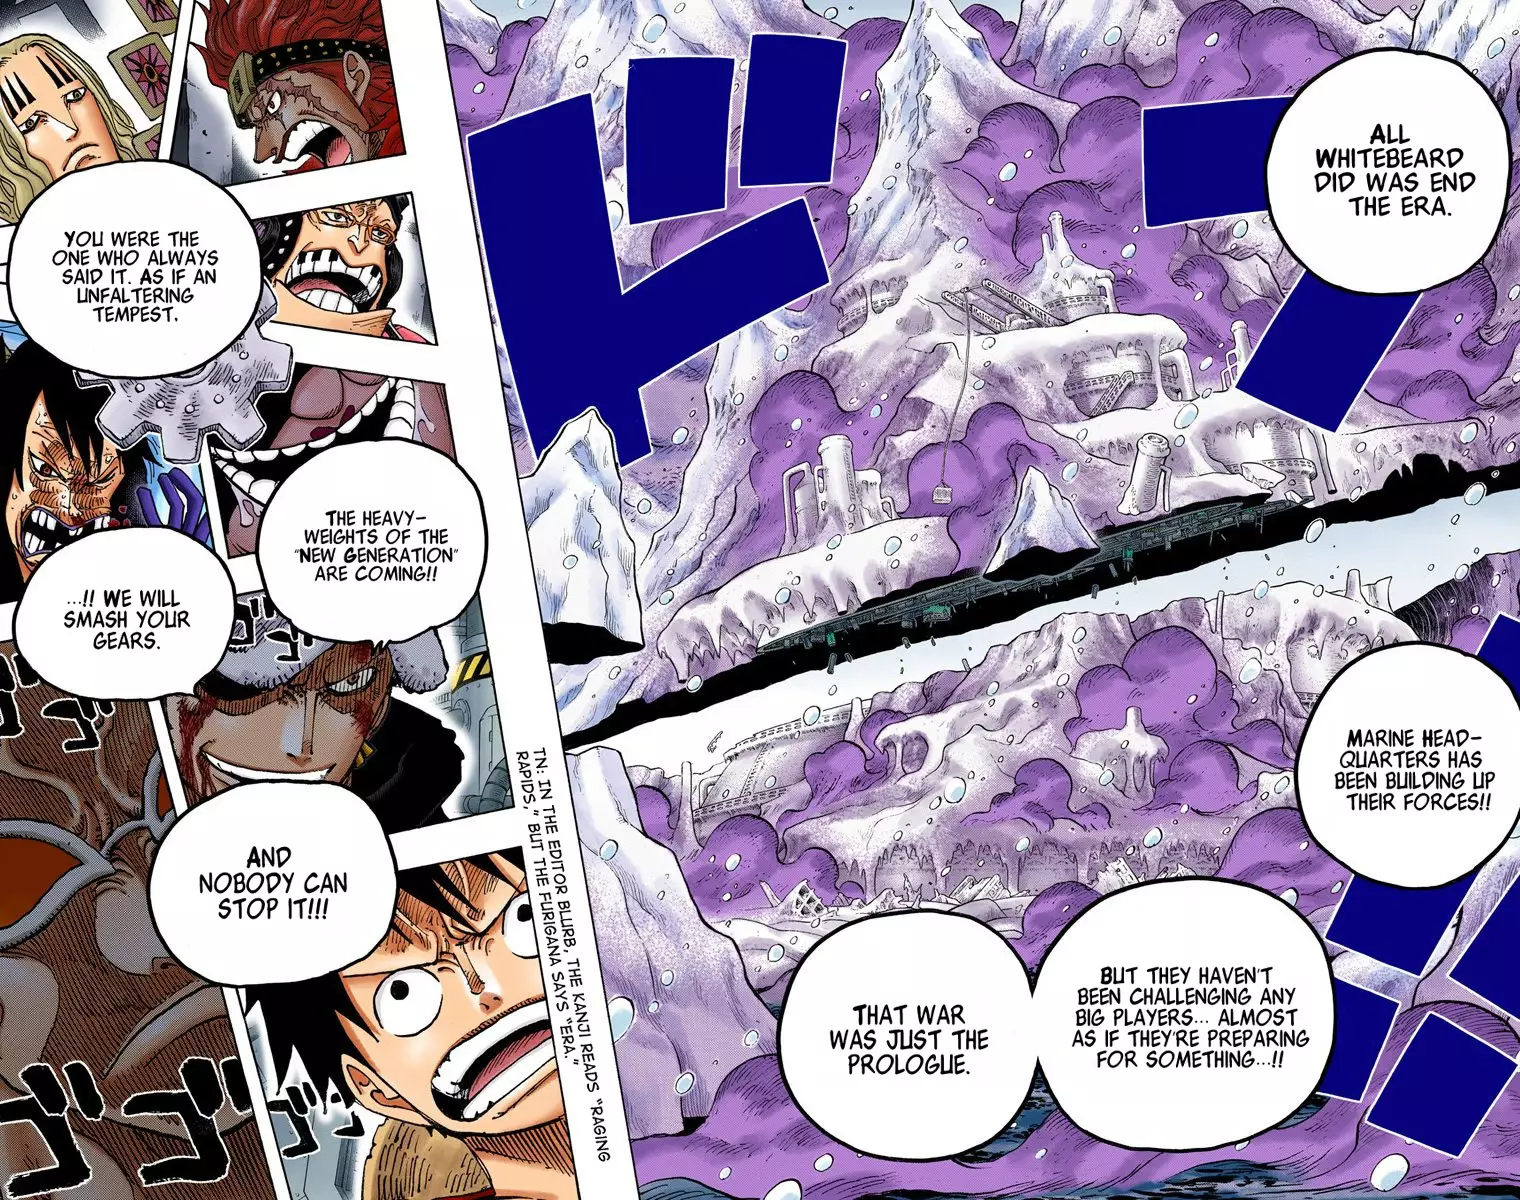 One Piece - Digital Colored Comics - 690 page 18-23d1bbae